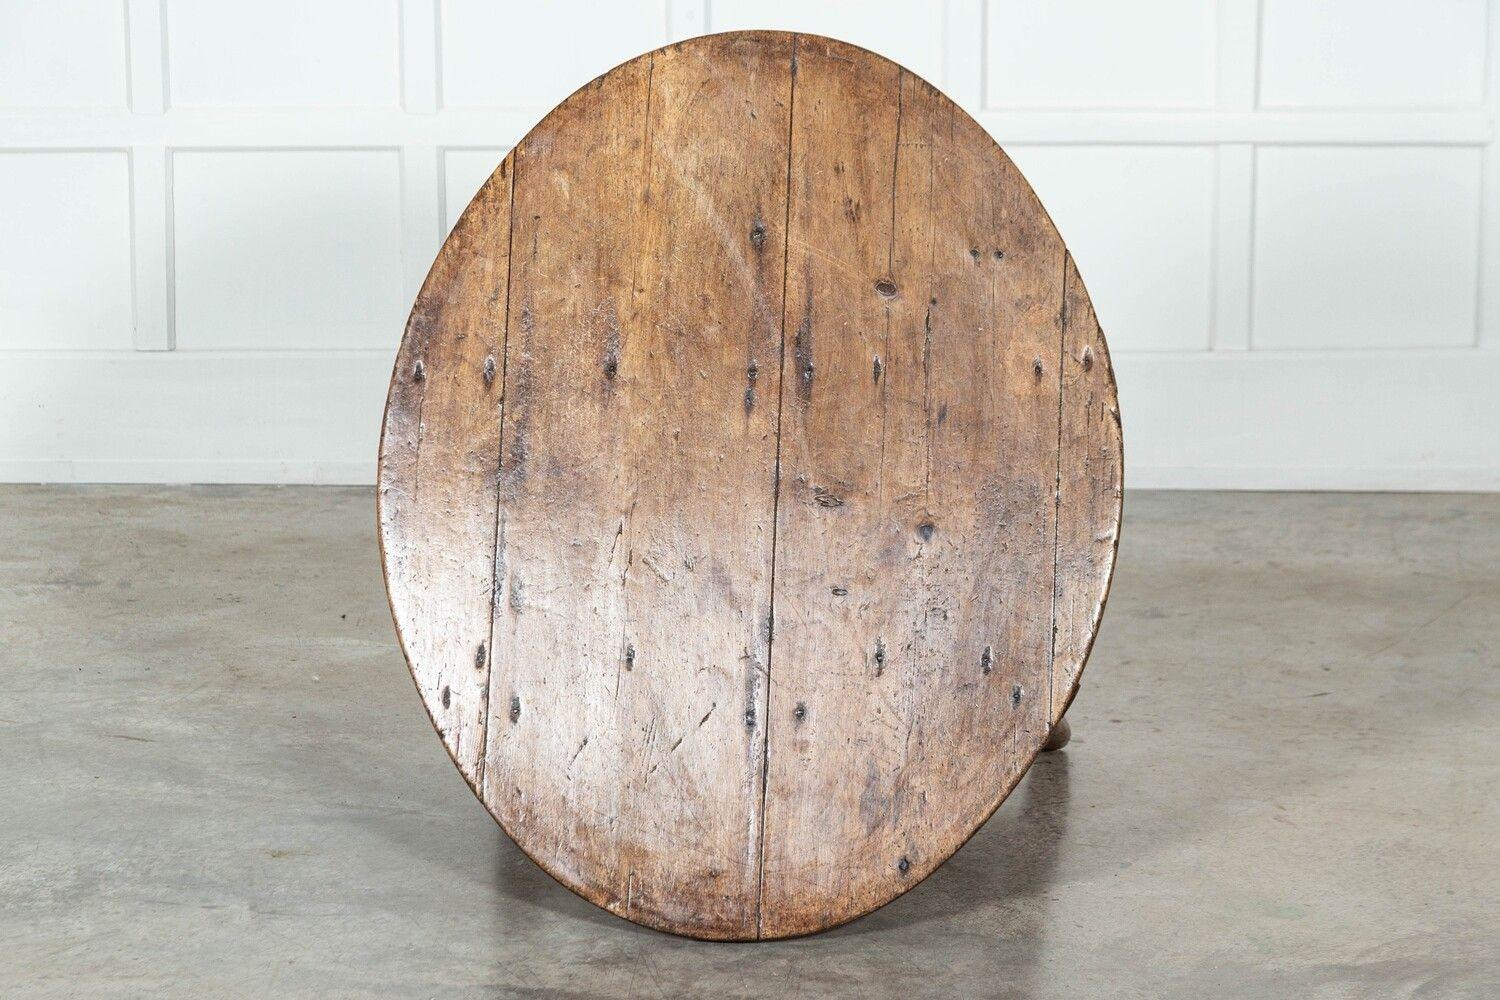 circa 1780
Large 18thC English West Country Sycamore Cricket Table
An exceptional Example
sku 1642
W99 x D80 x H71 cm